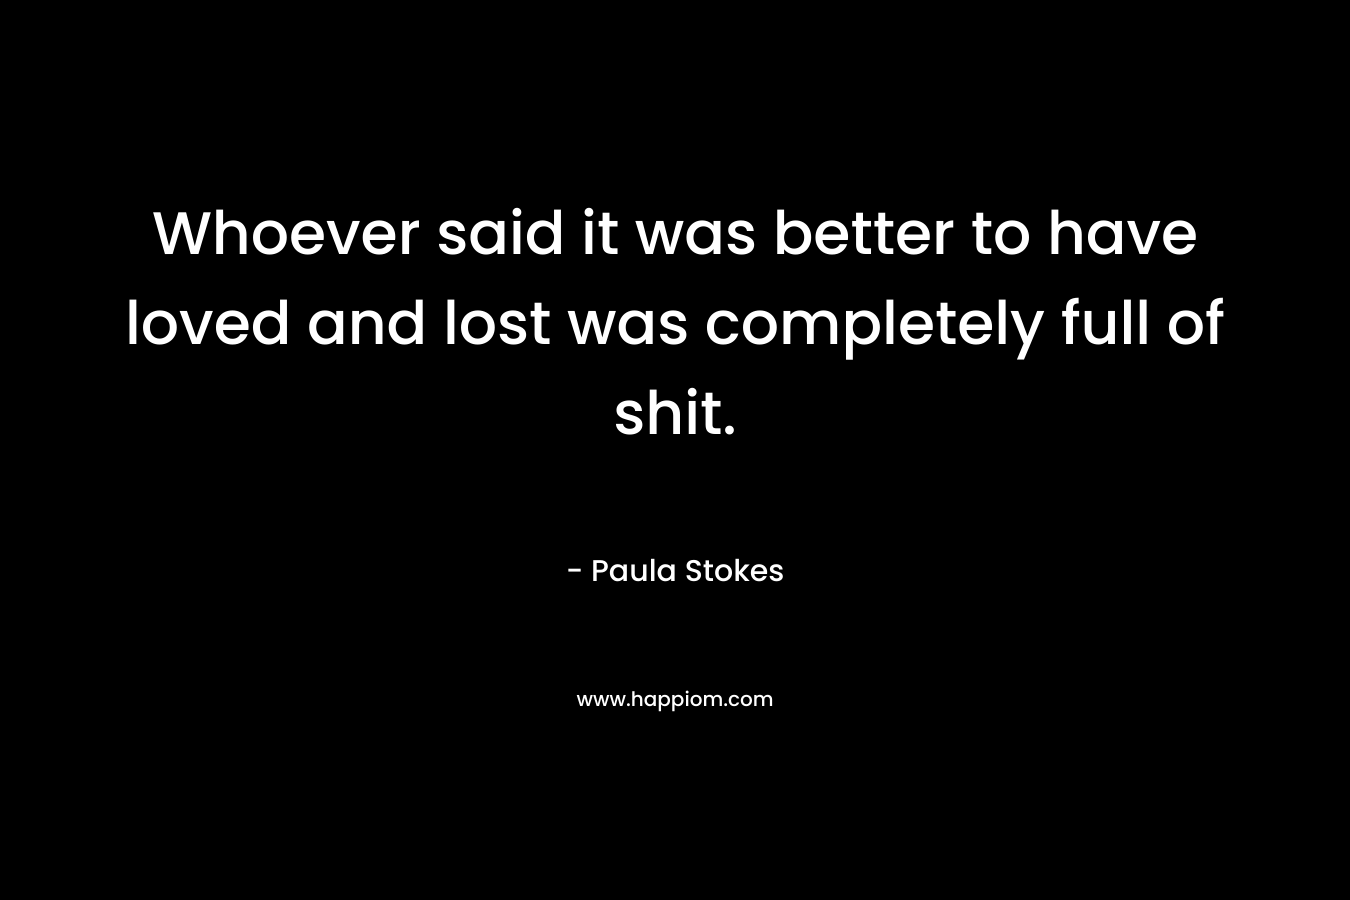 Whoever said it was better to have loved and lost was completely full of shit. – Paula Stokes